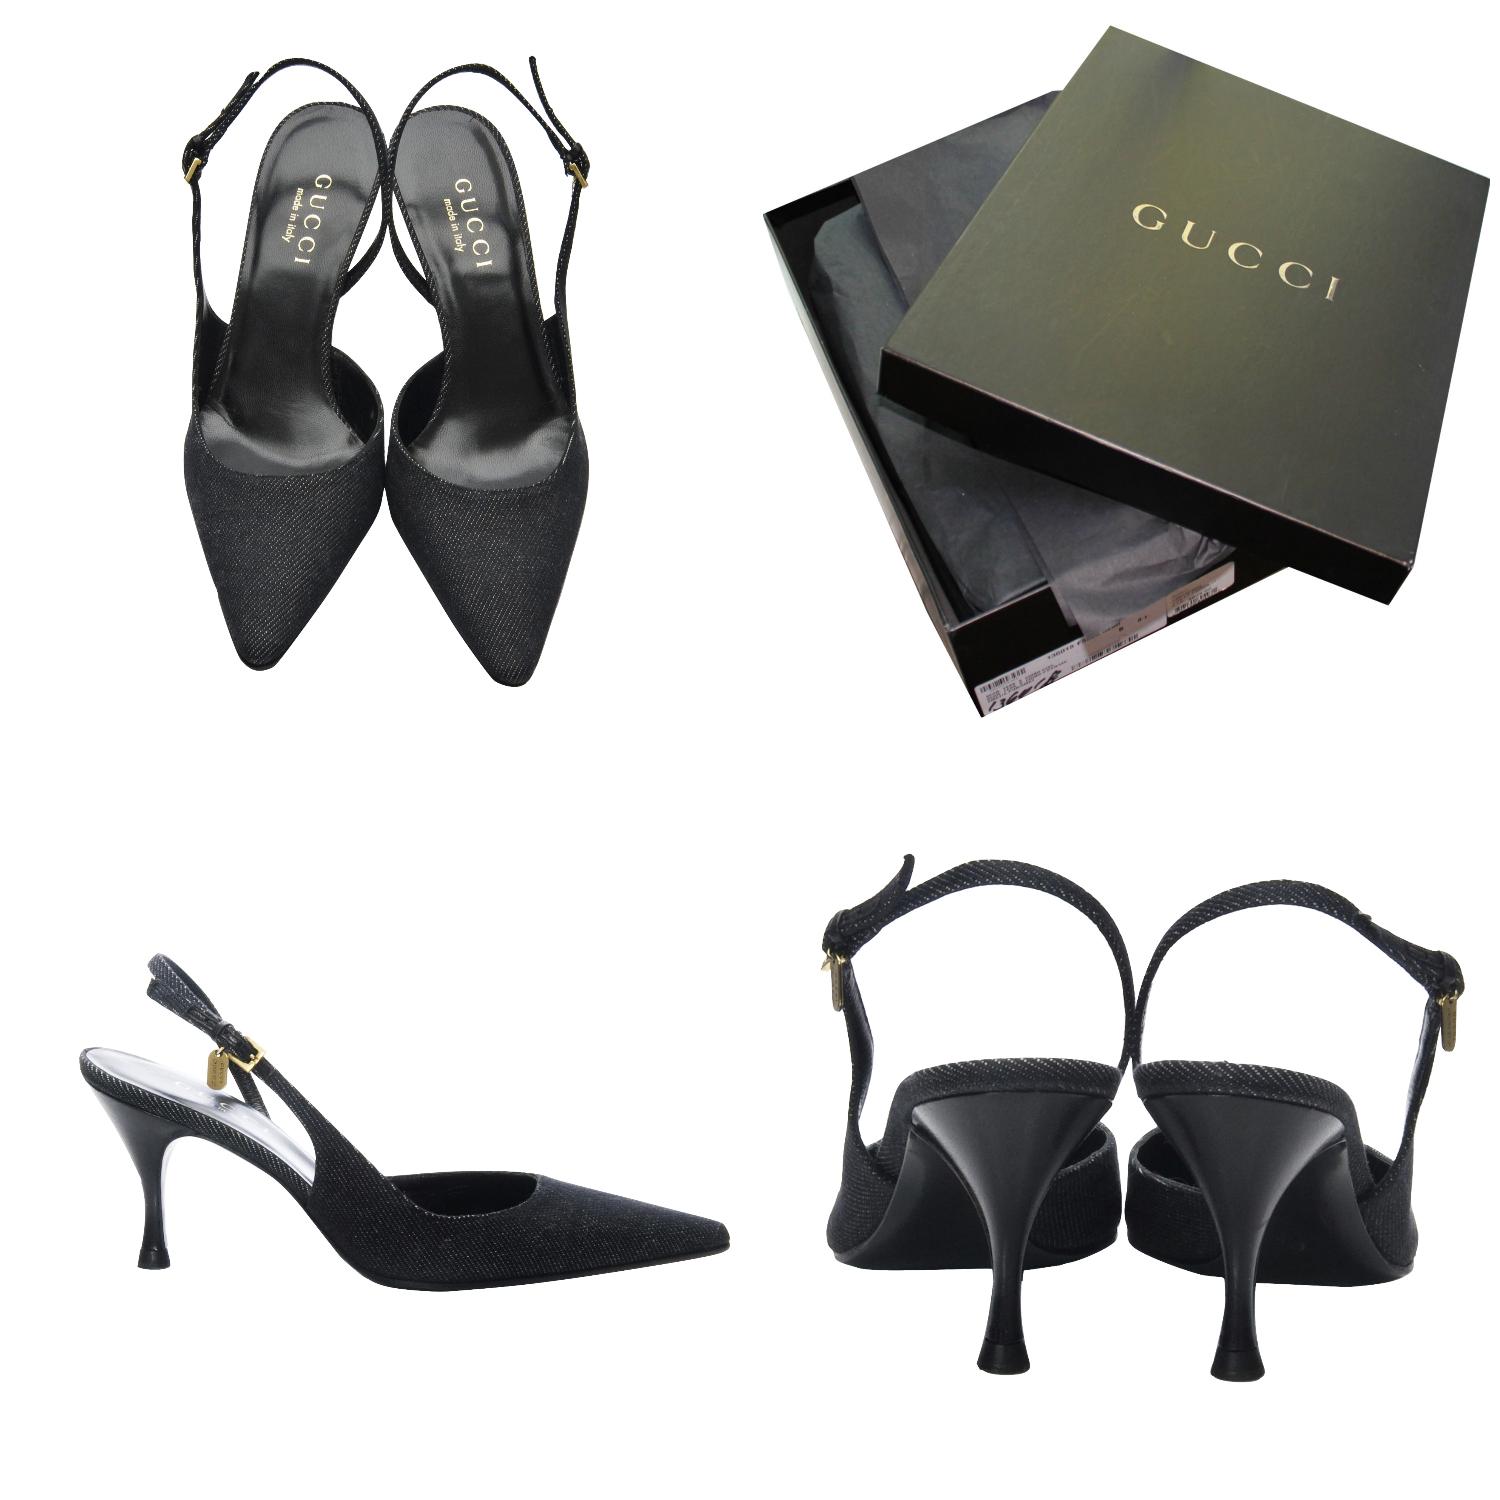 Gucci Cruise Denim Heels

Brand New
* Cruise Line 2003
* Size: 36.5
* Soft Black Brushed Cotton
* Gold Cruise Dangle Charm
* Leather Footbed
* Adjustable Ankle Strap
* 3.25